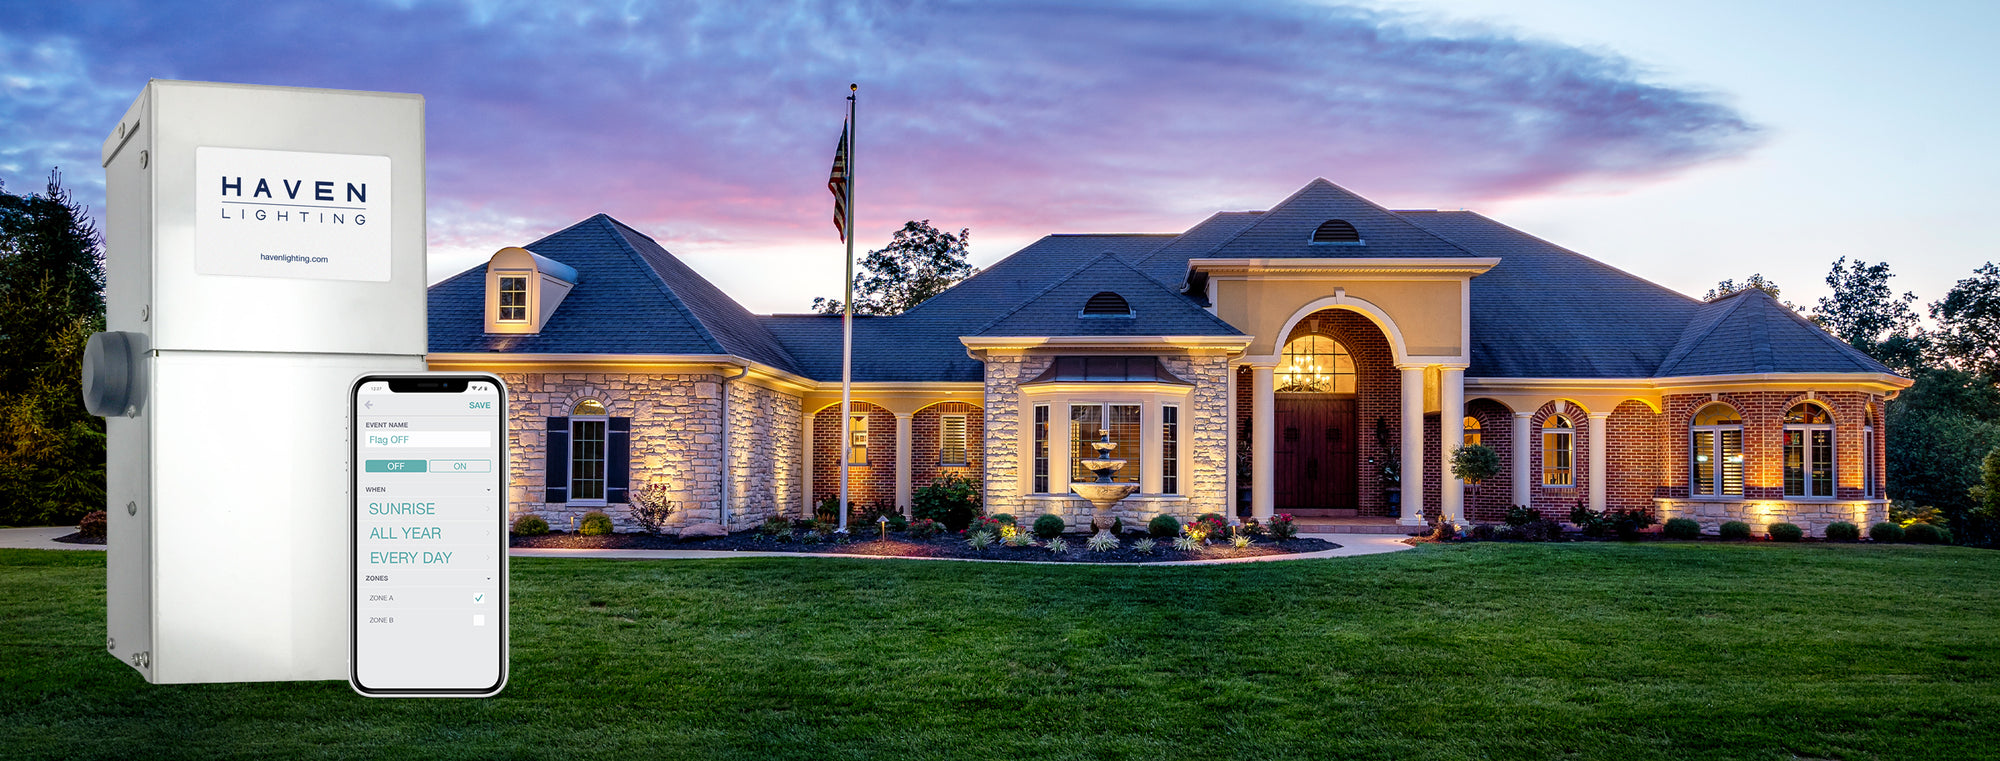 A home lighted with landscape lighting using a smart phone controlled landscape lighting transformer